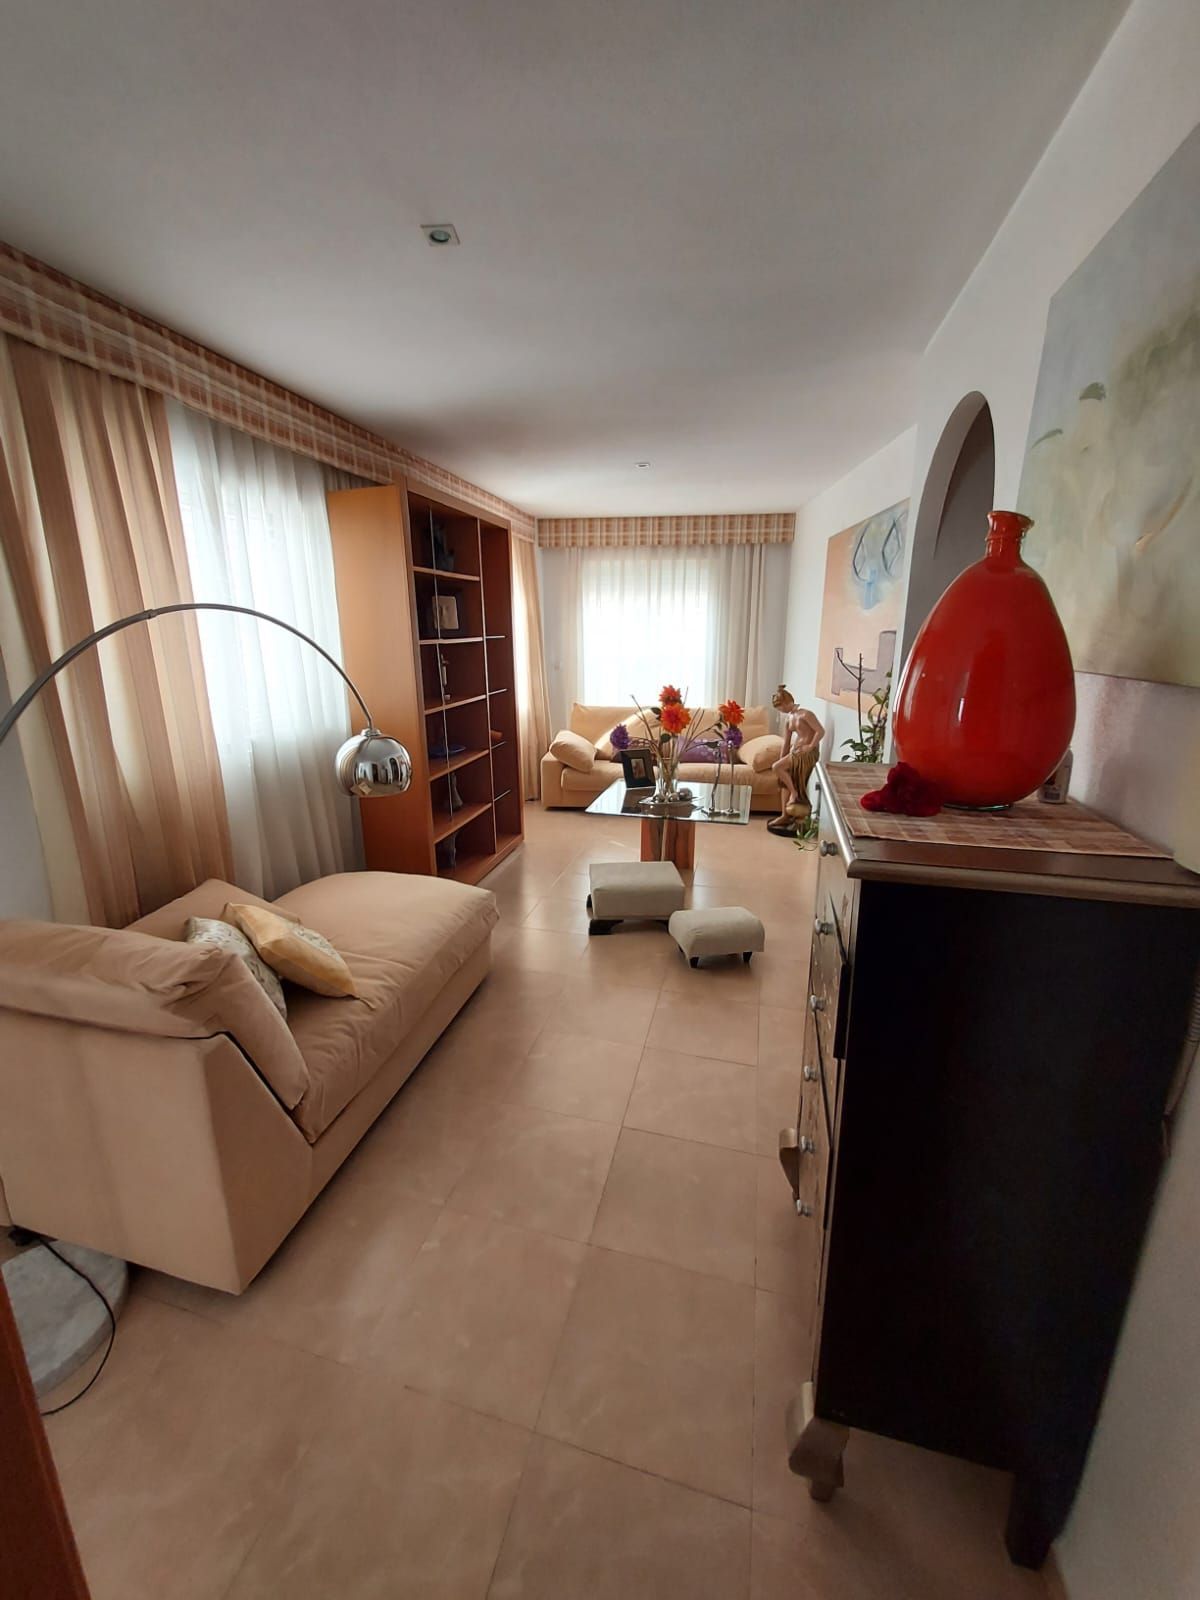 Terraced House in Alicante, for sale